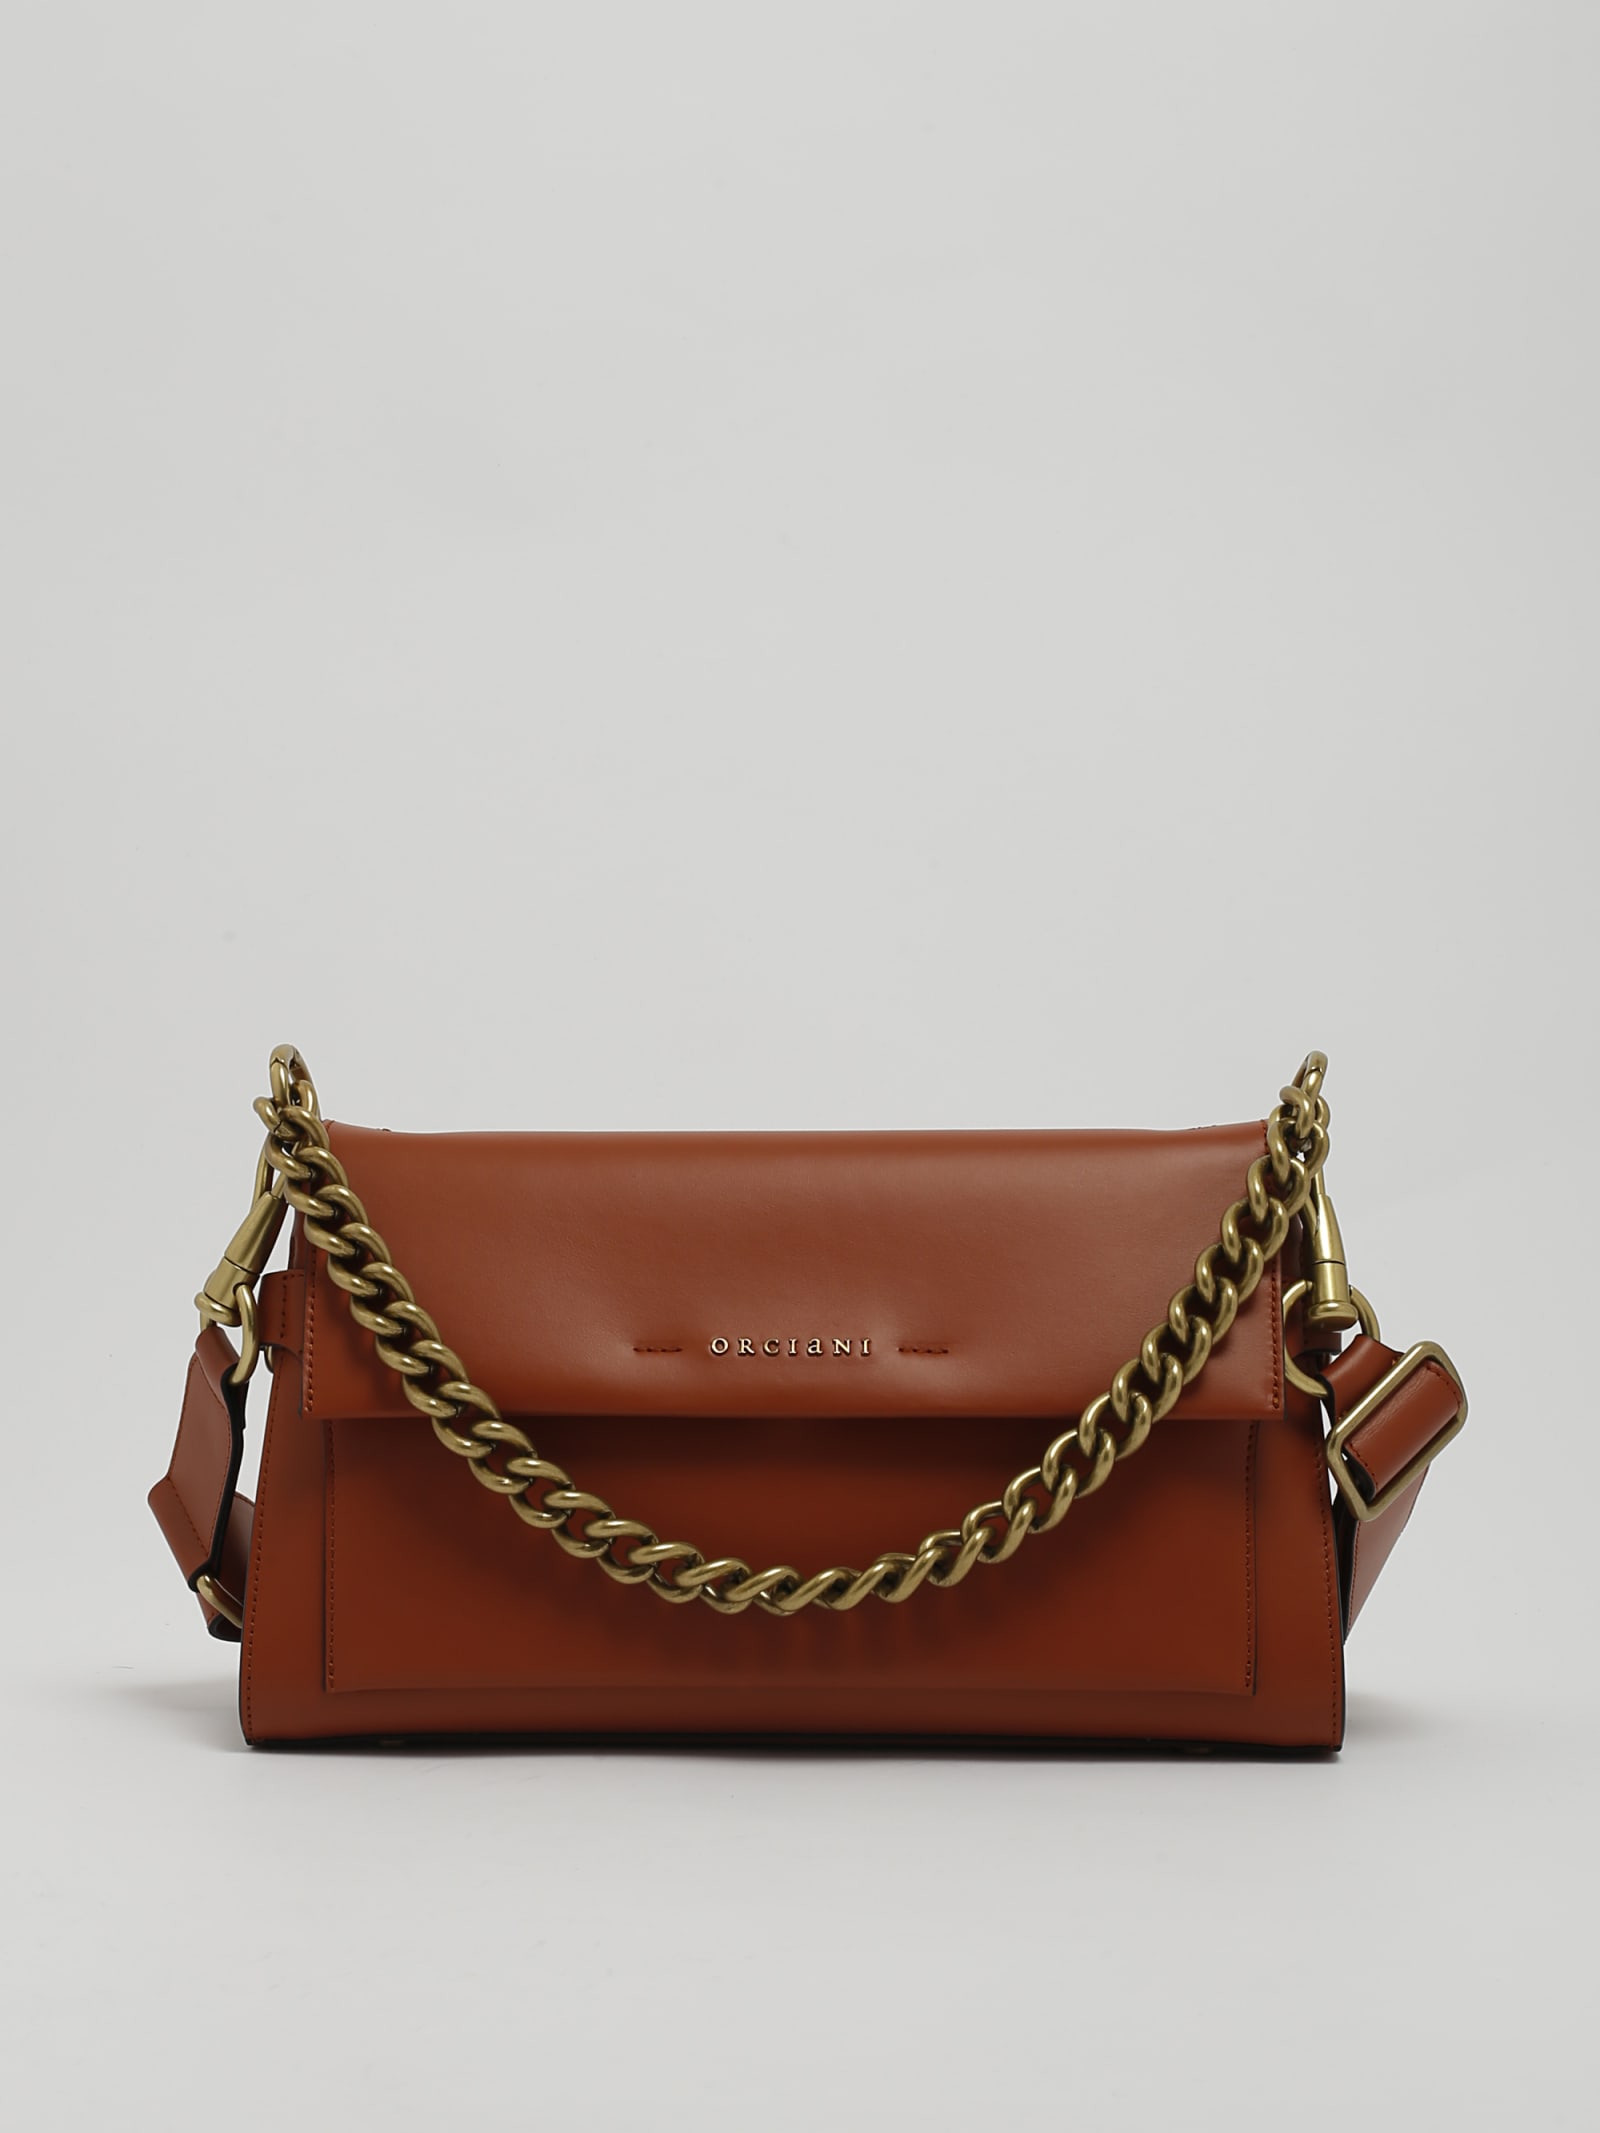 Orciani Missy Longuette Couture Shoulder Bag In Cuoio